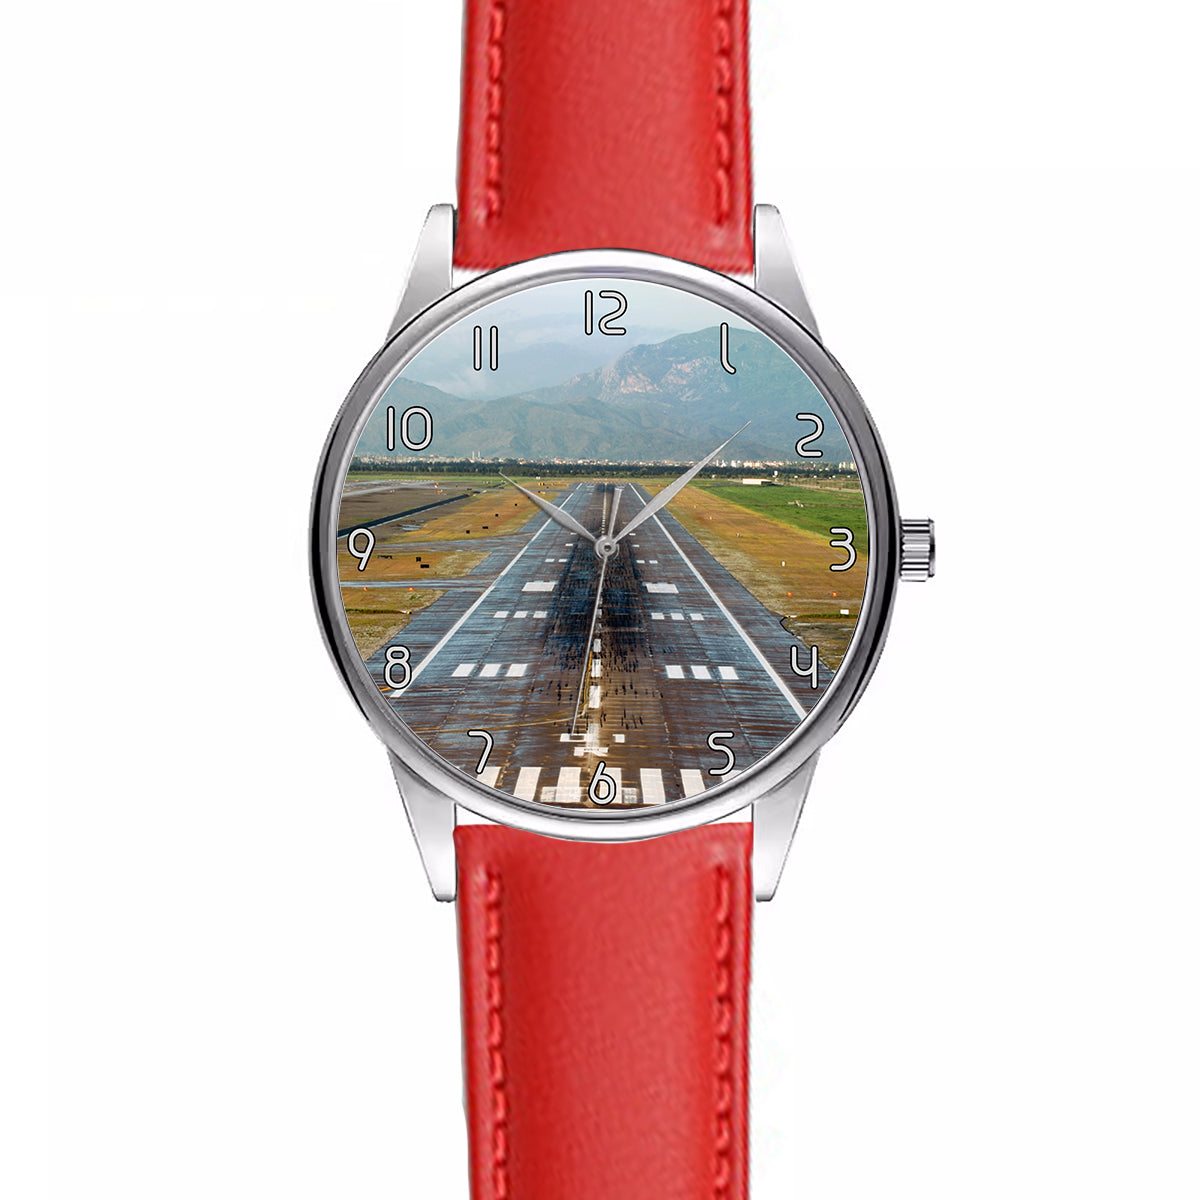 Mountain View and & Runway Designed Fashion Leather Strap Watches